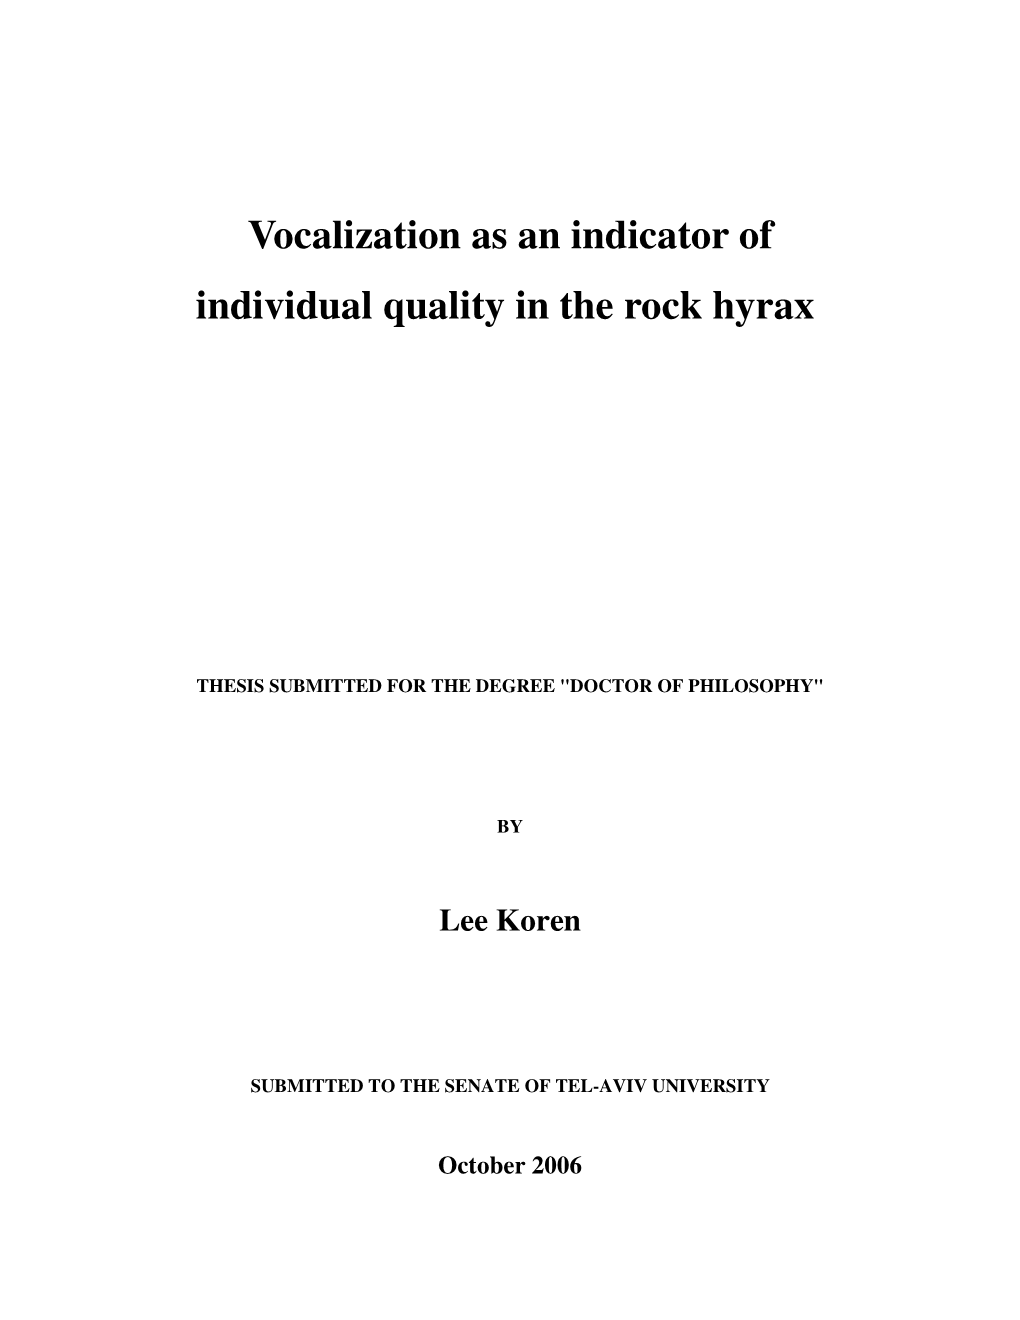 Vocalization As an Indicator of Individual Quality in the Rock Hyrax